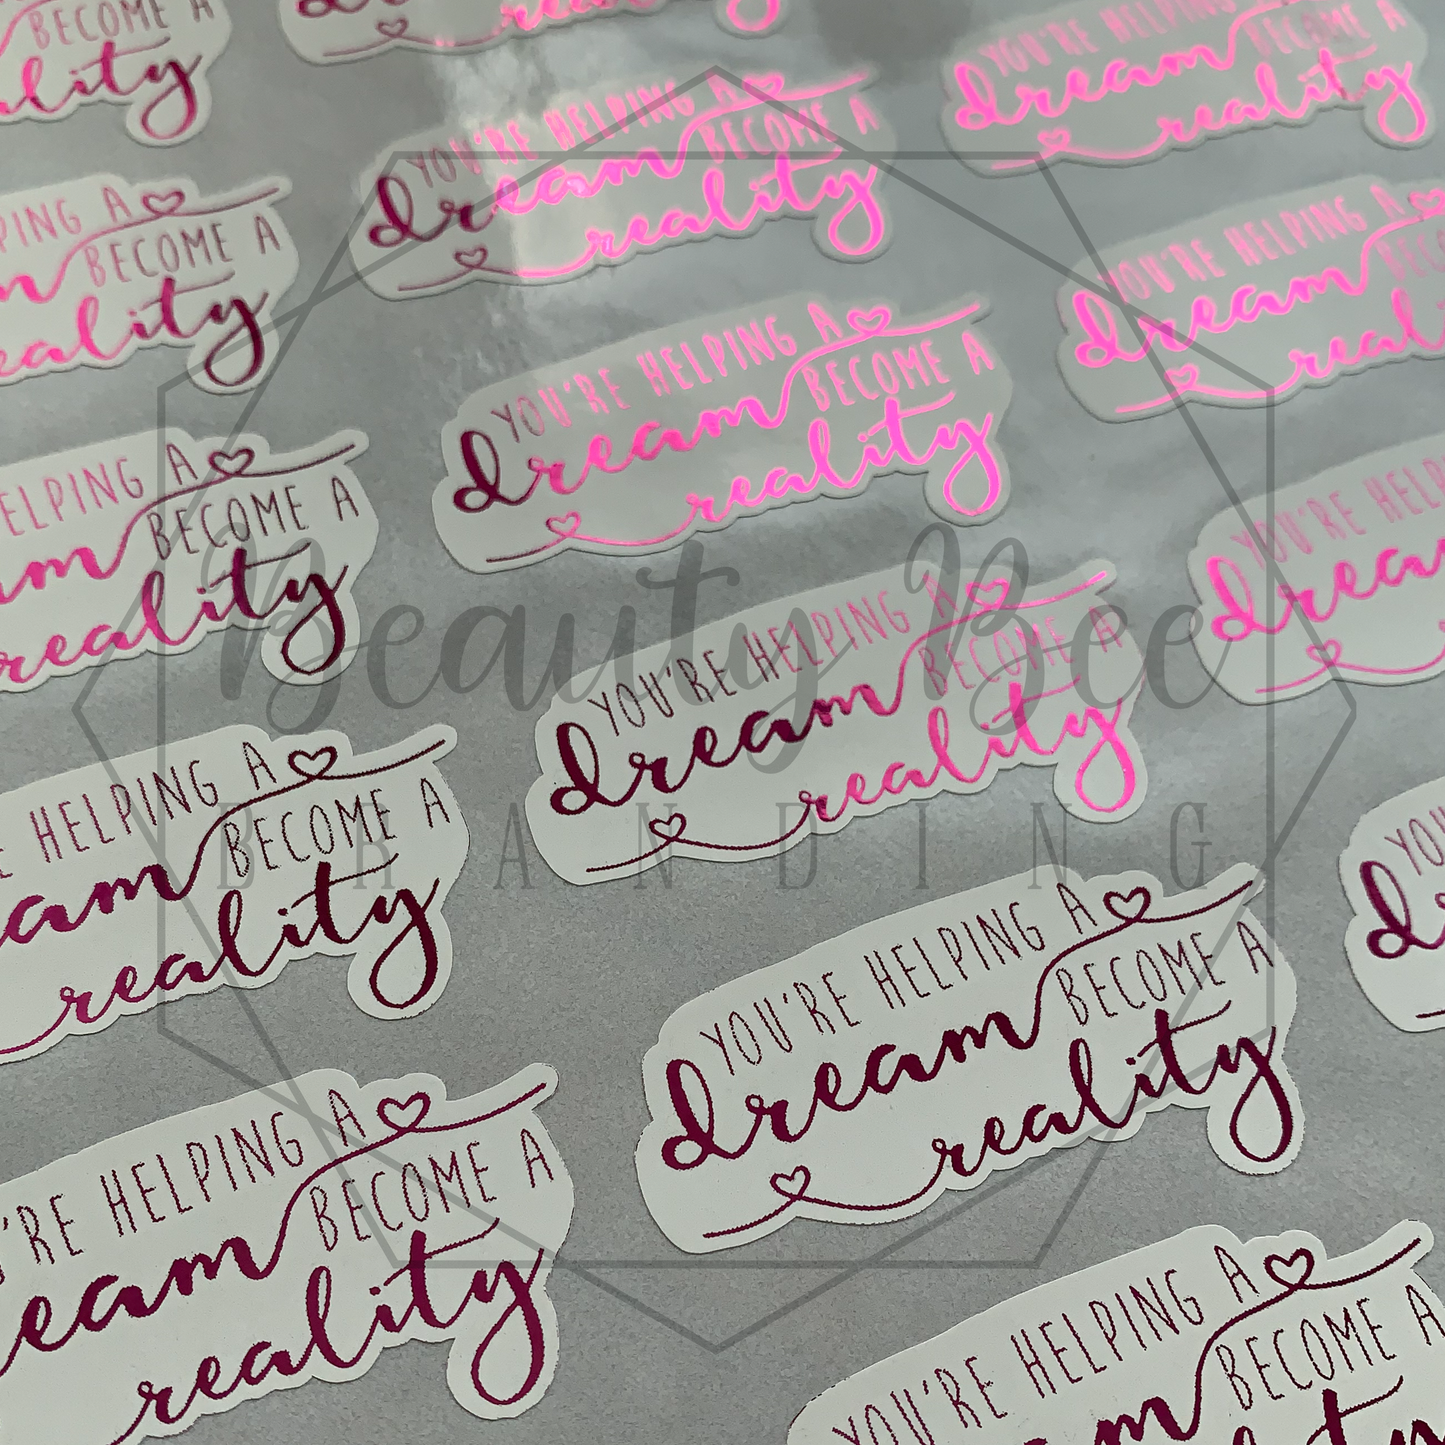 You're Helping a Dream Become a Reality Sticker Sheet